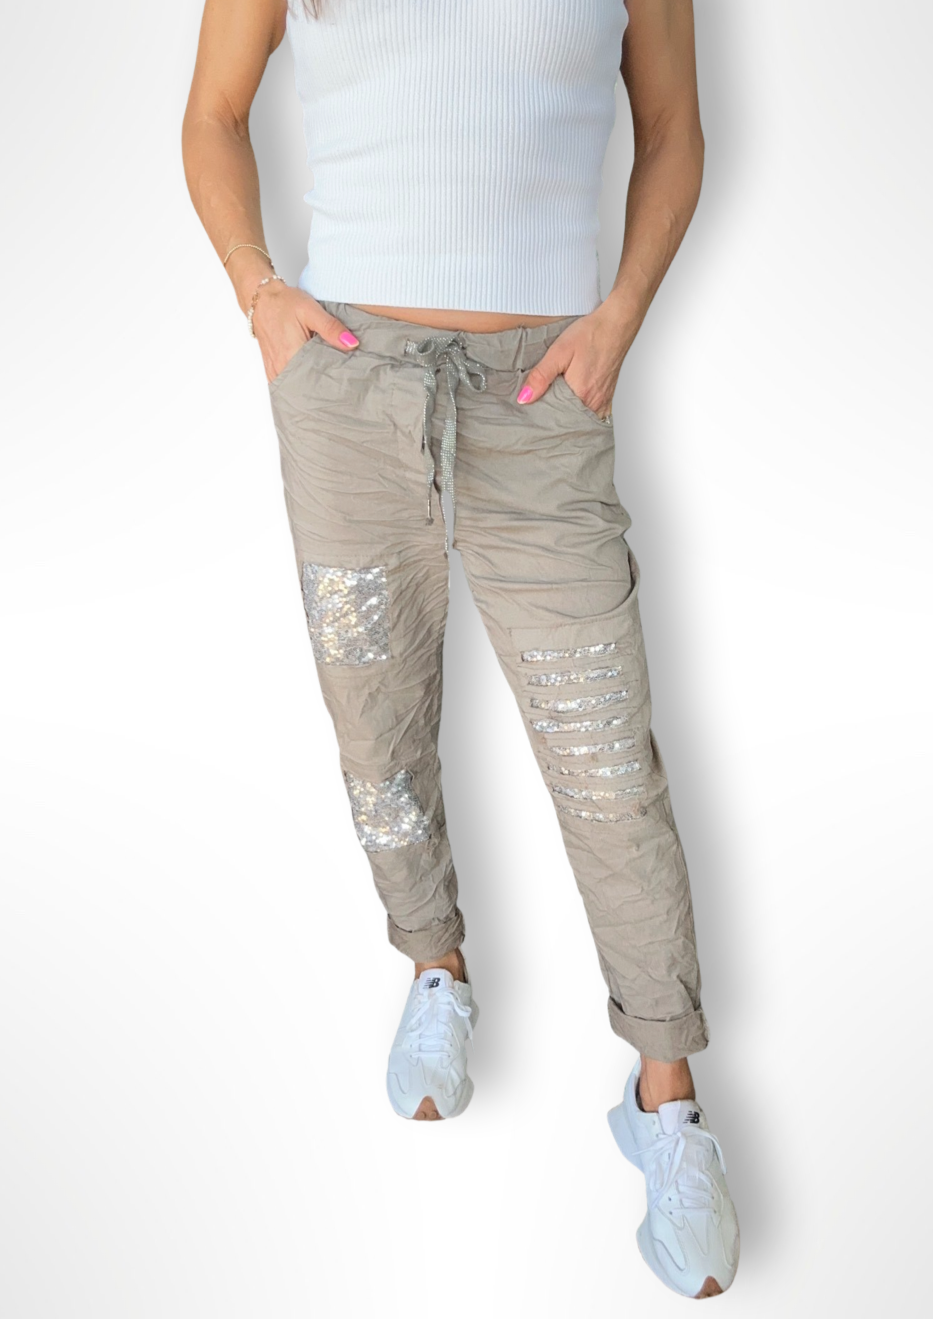 Milanese Sequin Pant - Mud, by Amici Our Milanese Sequin Pant are the perfect pant to get into that happy weekend vibe! With a blend of viscose and stretch material for superior comfort, these hip joggers feature sequin detailing  and drawstring waist. Stand out in style for your weekend ahead with these fabulous joggers!  Viscose blend Drawstring waist Funky sequin design Wear mid or low rise